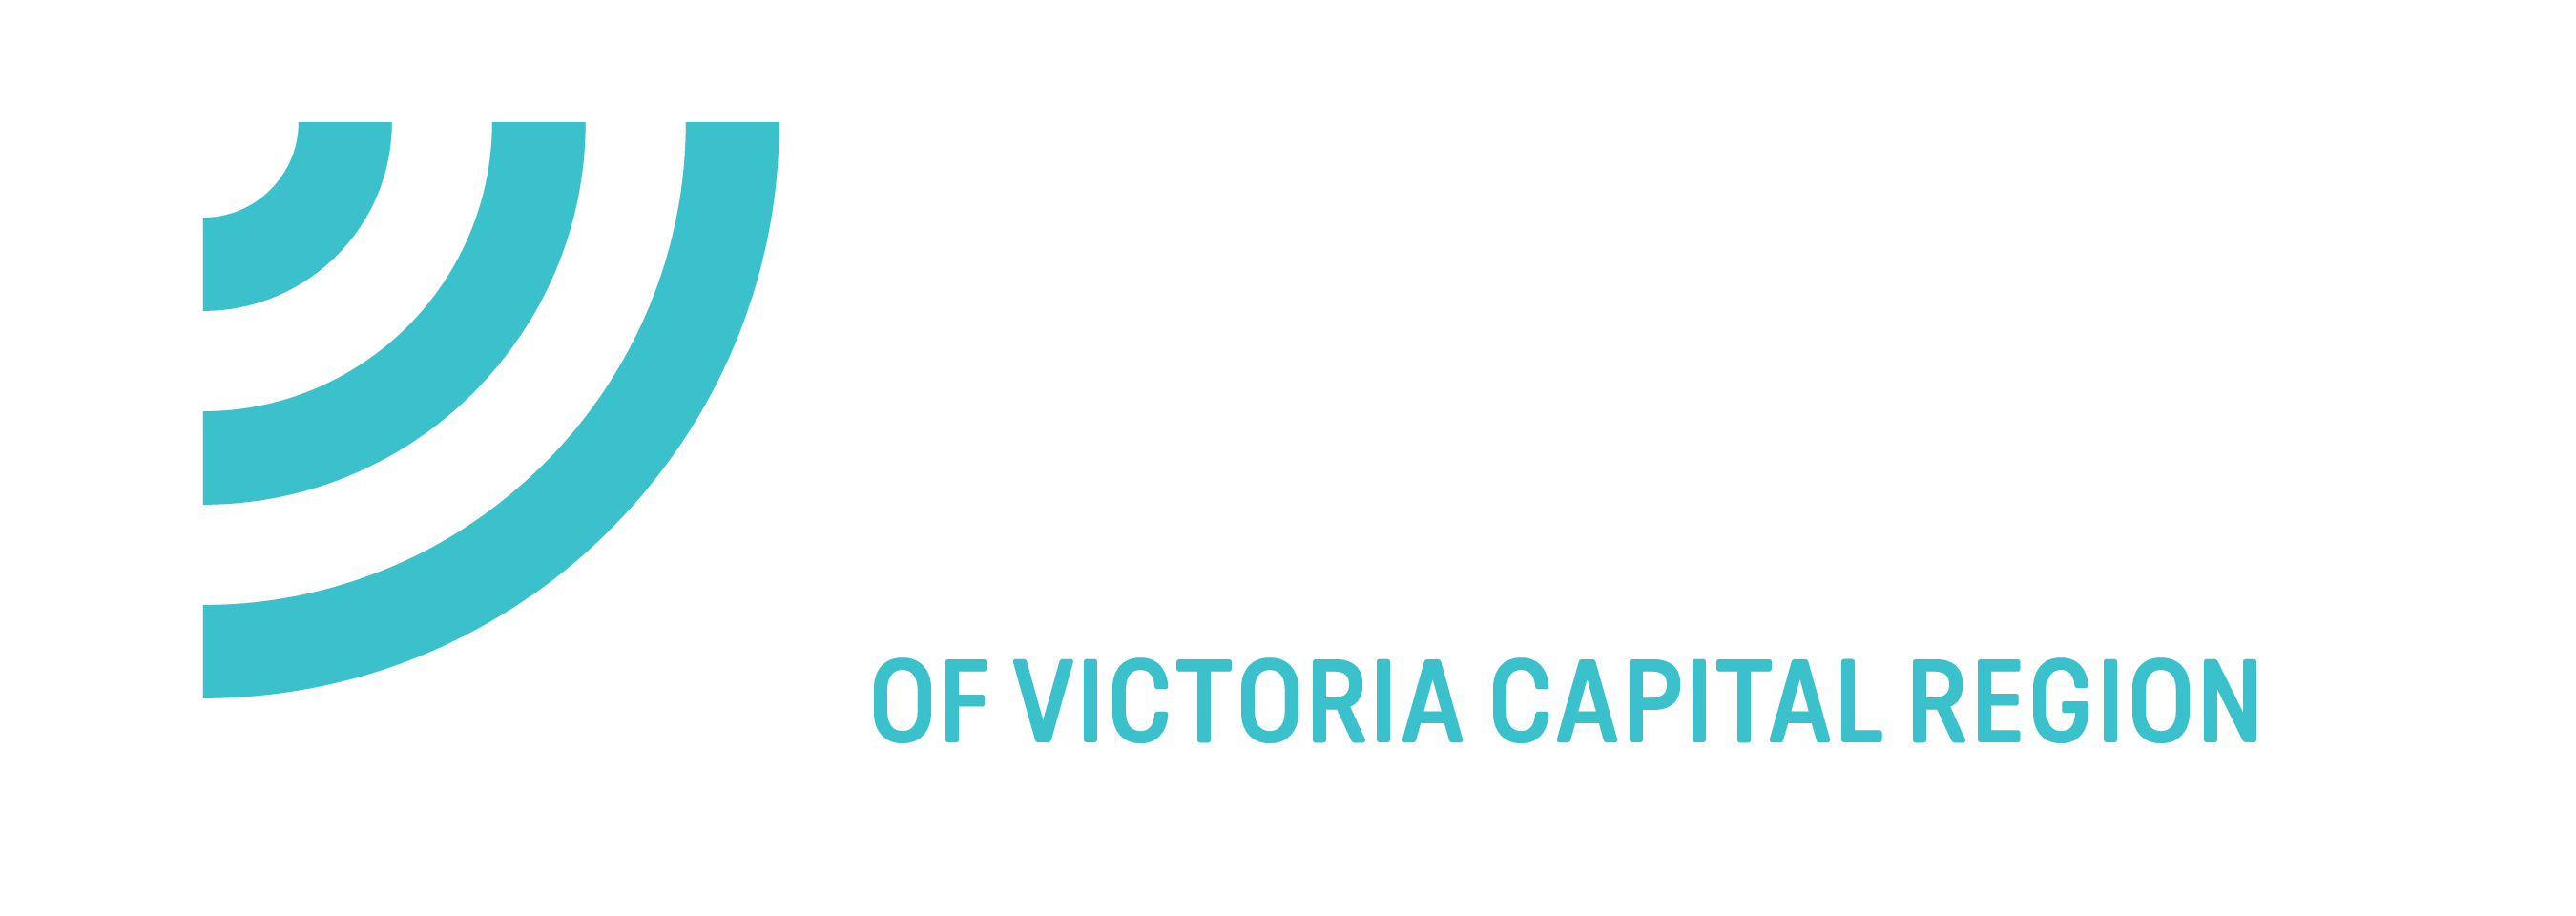 BC Day: Celebrating and supporting BC's young people - Big Brothers Big Sisters of Victoria Capital Region